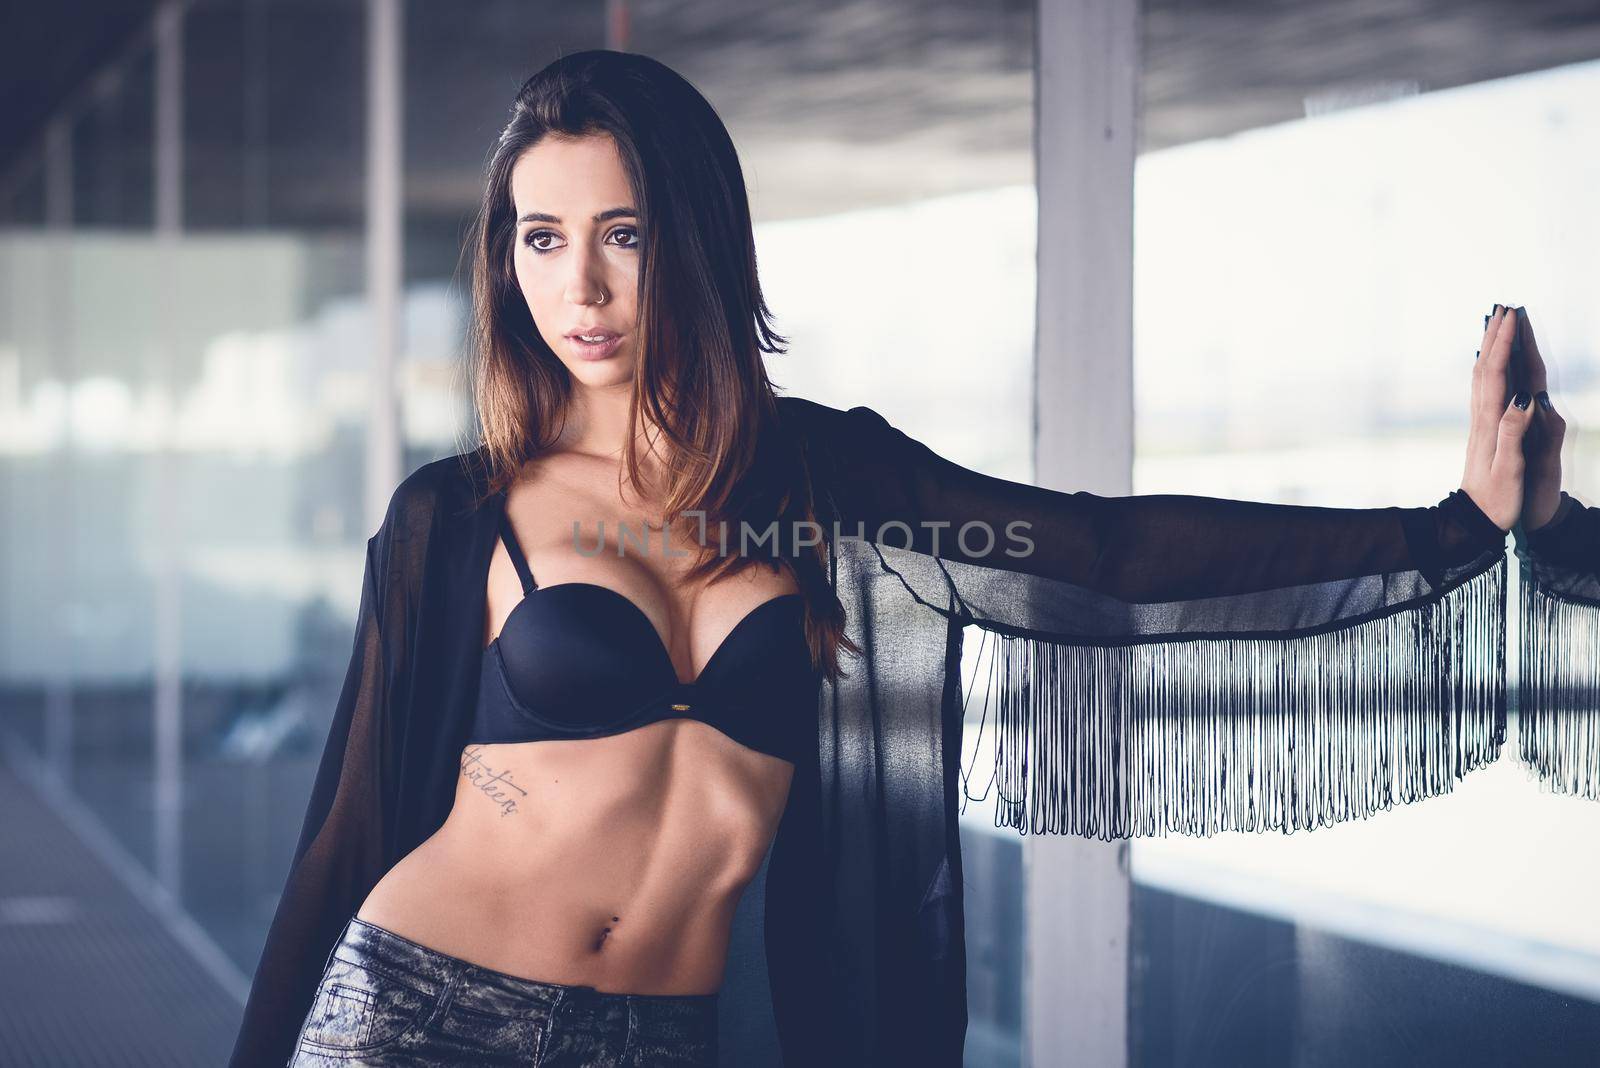 Portrait of young beautiful woman, model of fashion, wearing transparent shirt and black bra